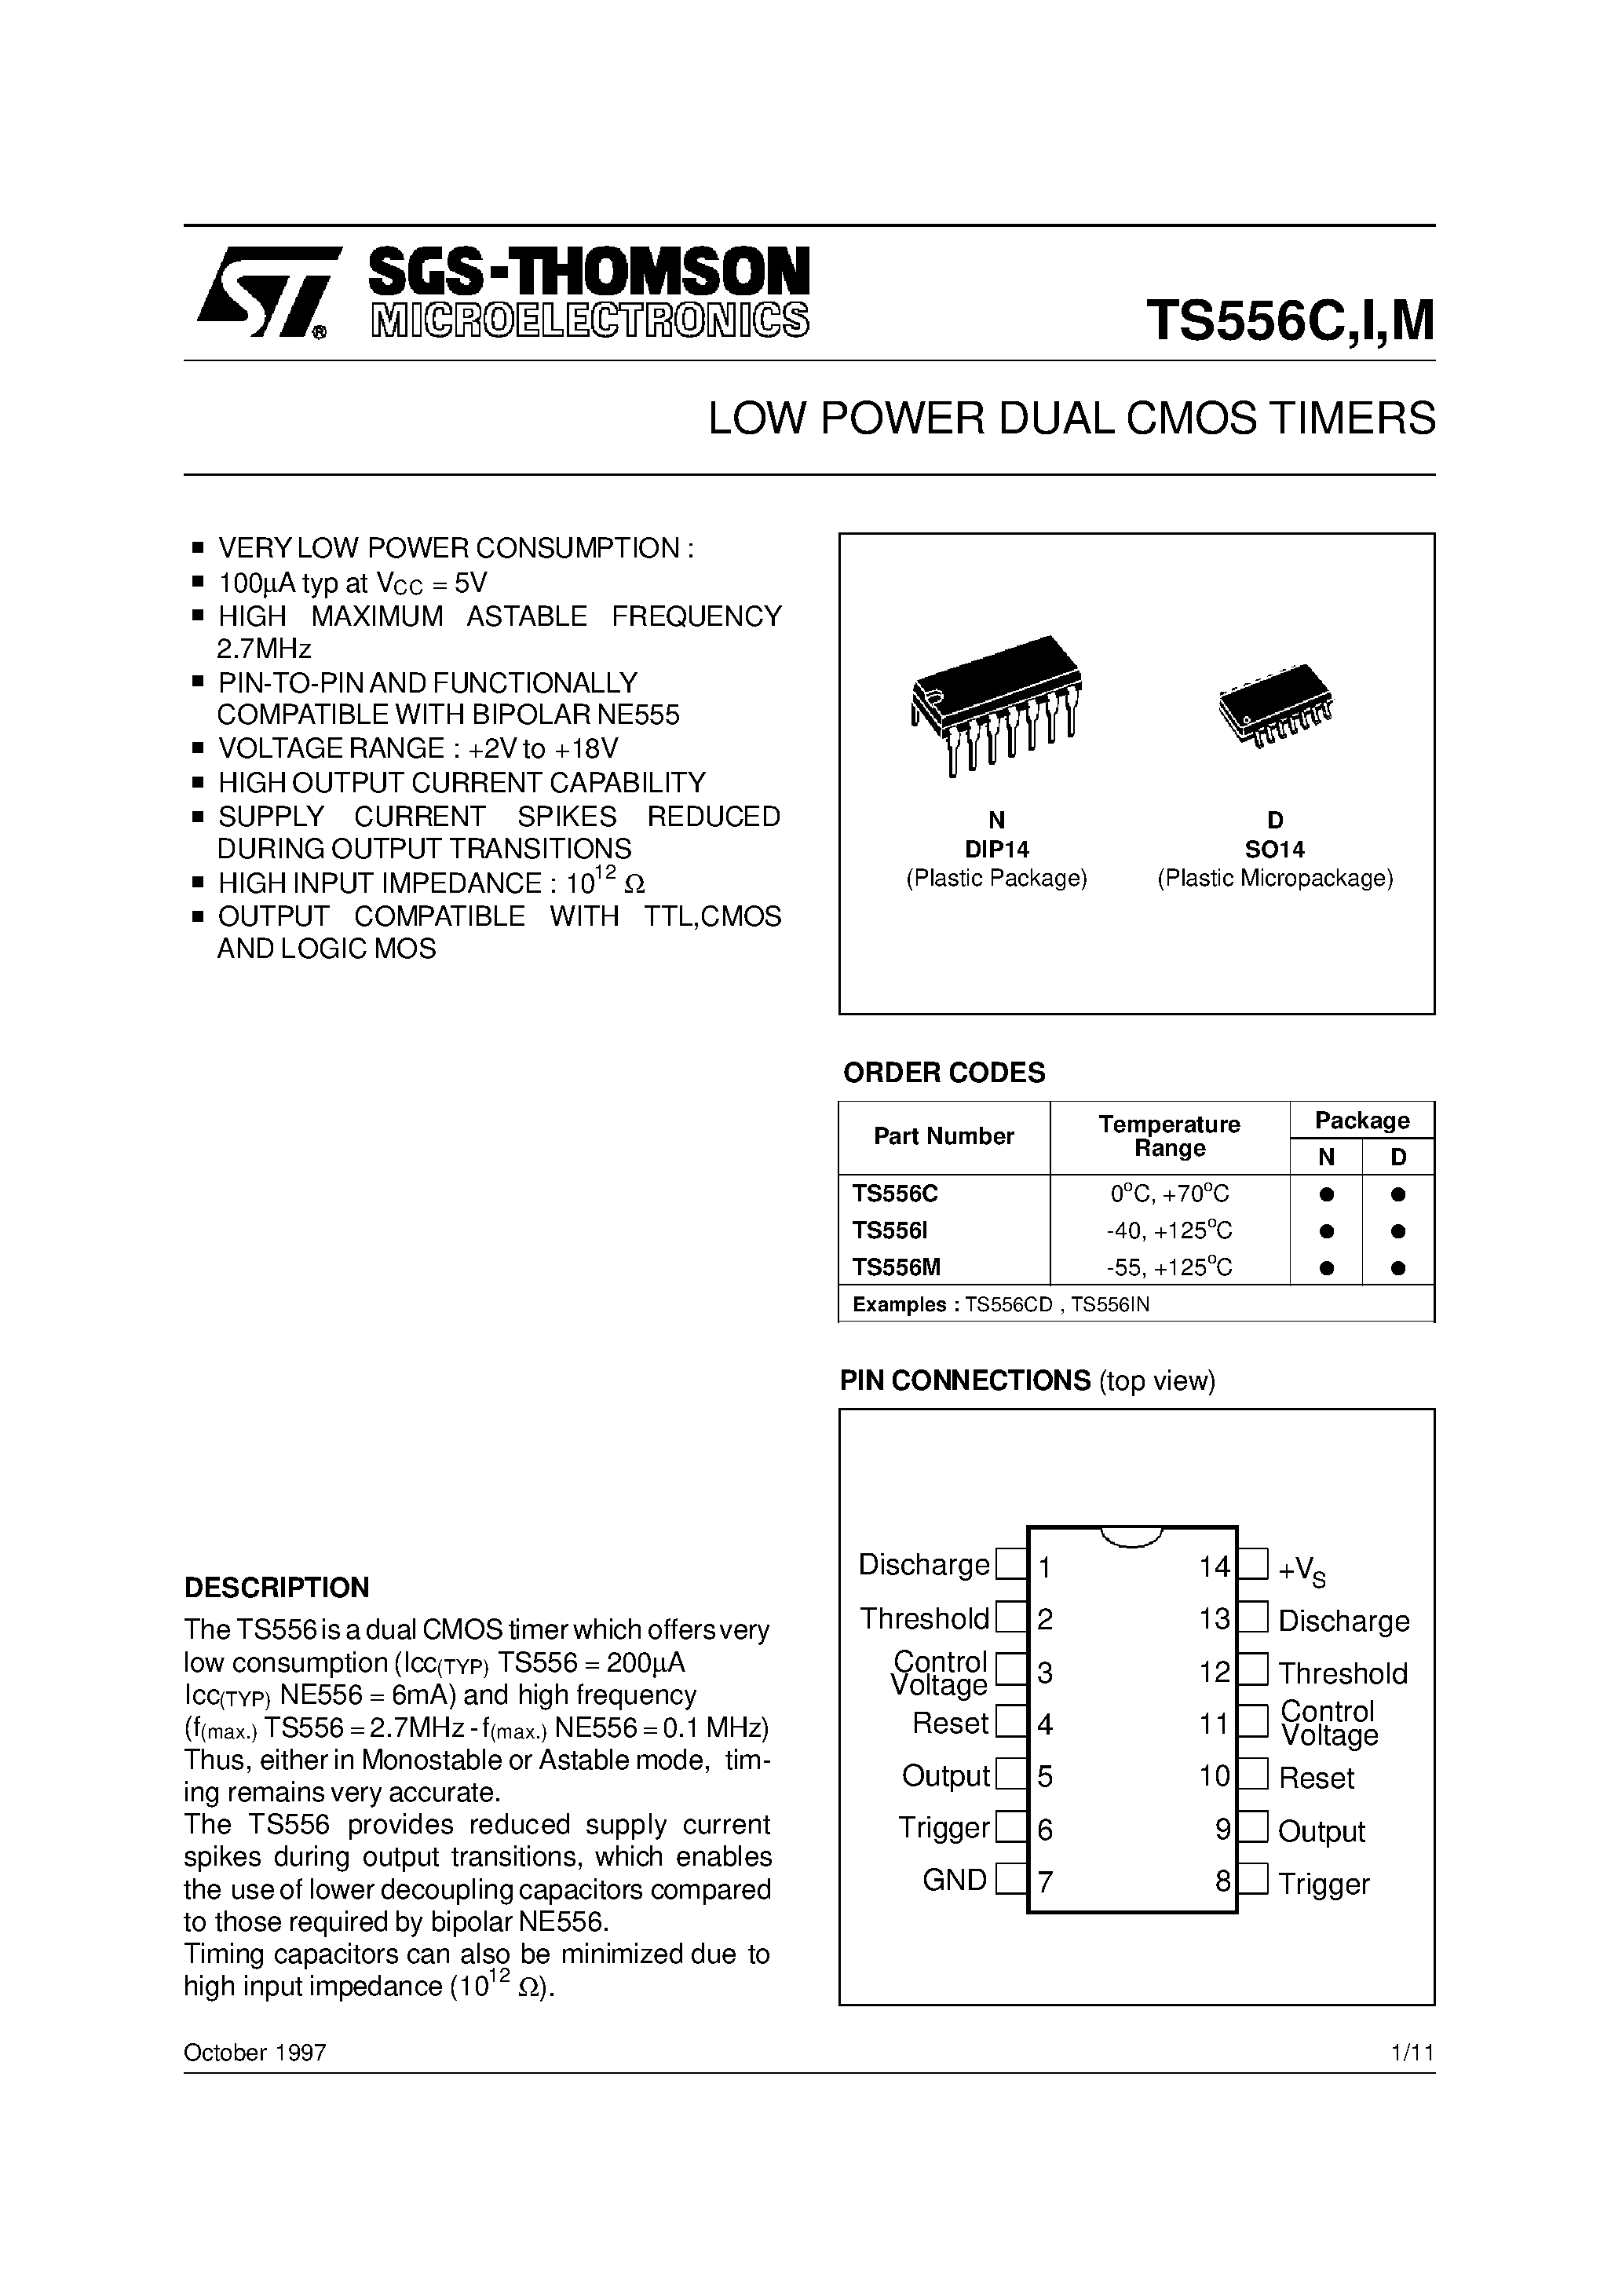 Datasheet TS556I - LOW POWER DUAL CMOS TIMER page 1